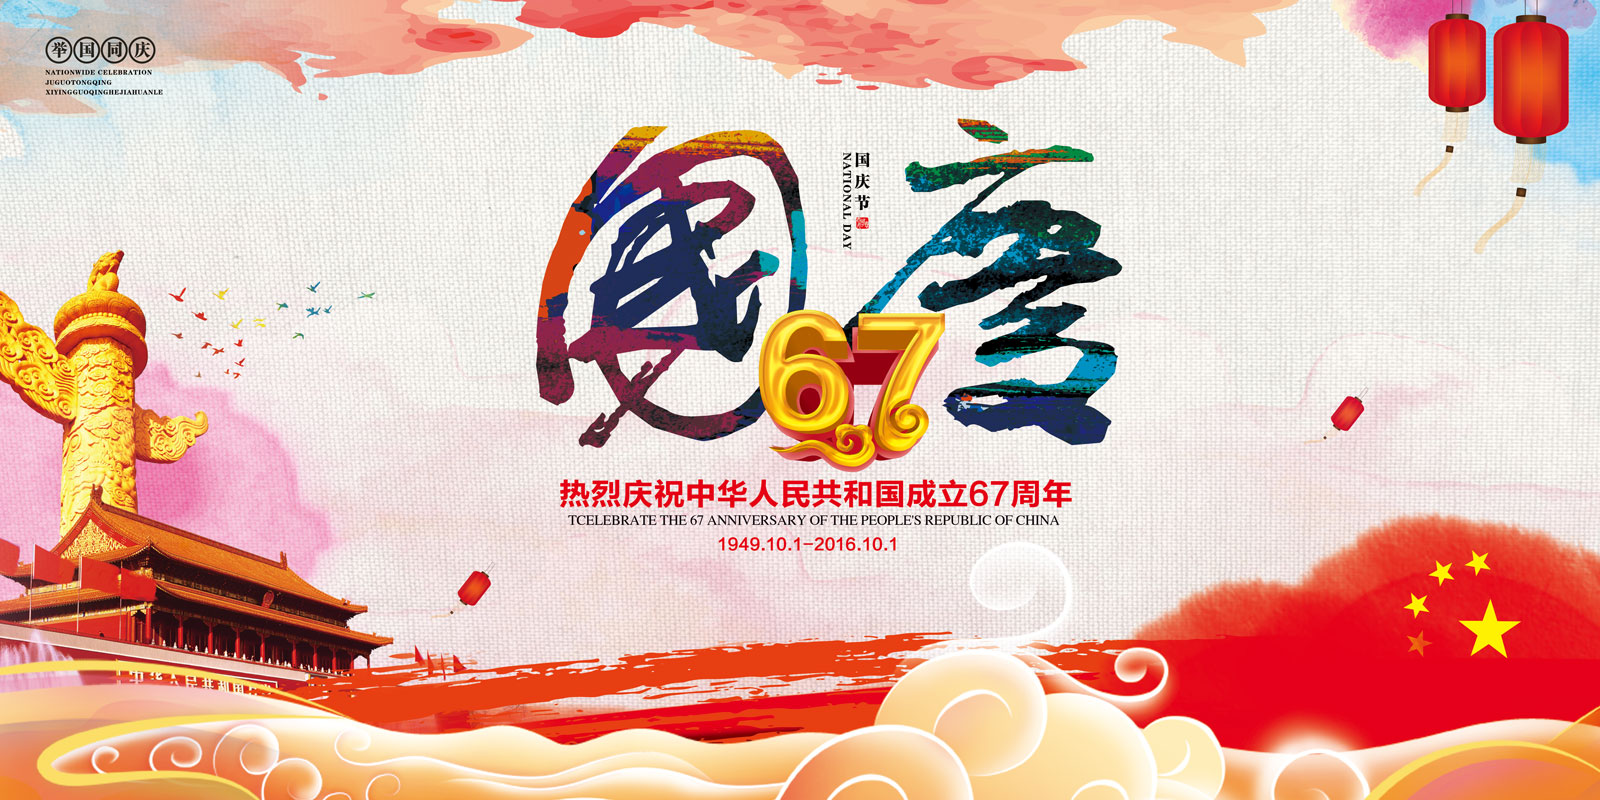 China National Day poster design program - PSD File Free Download